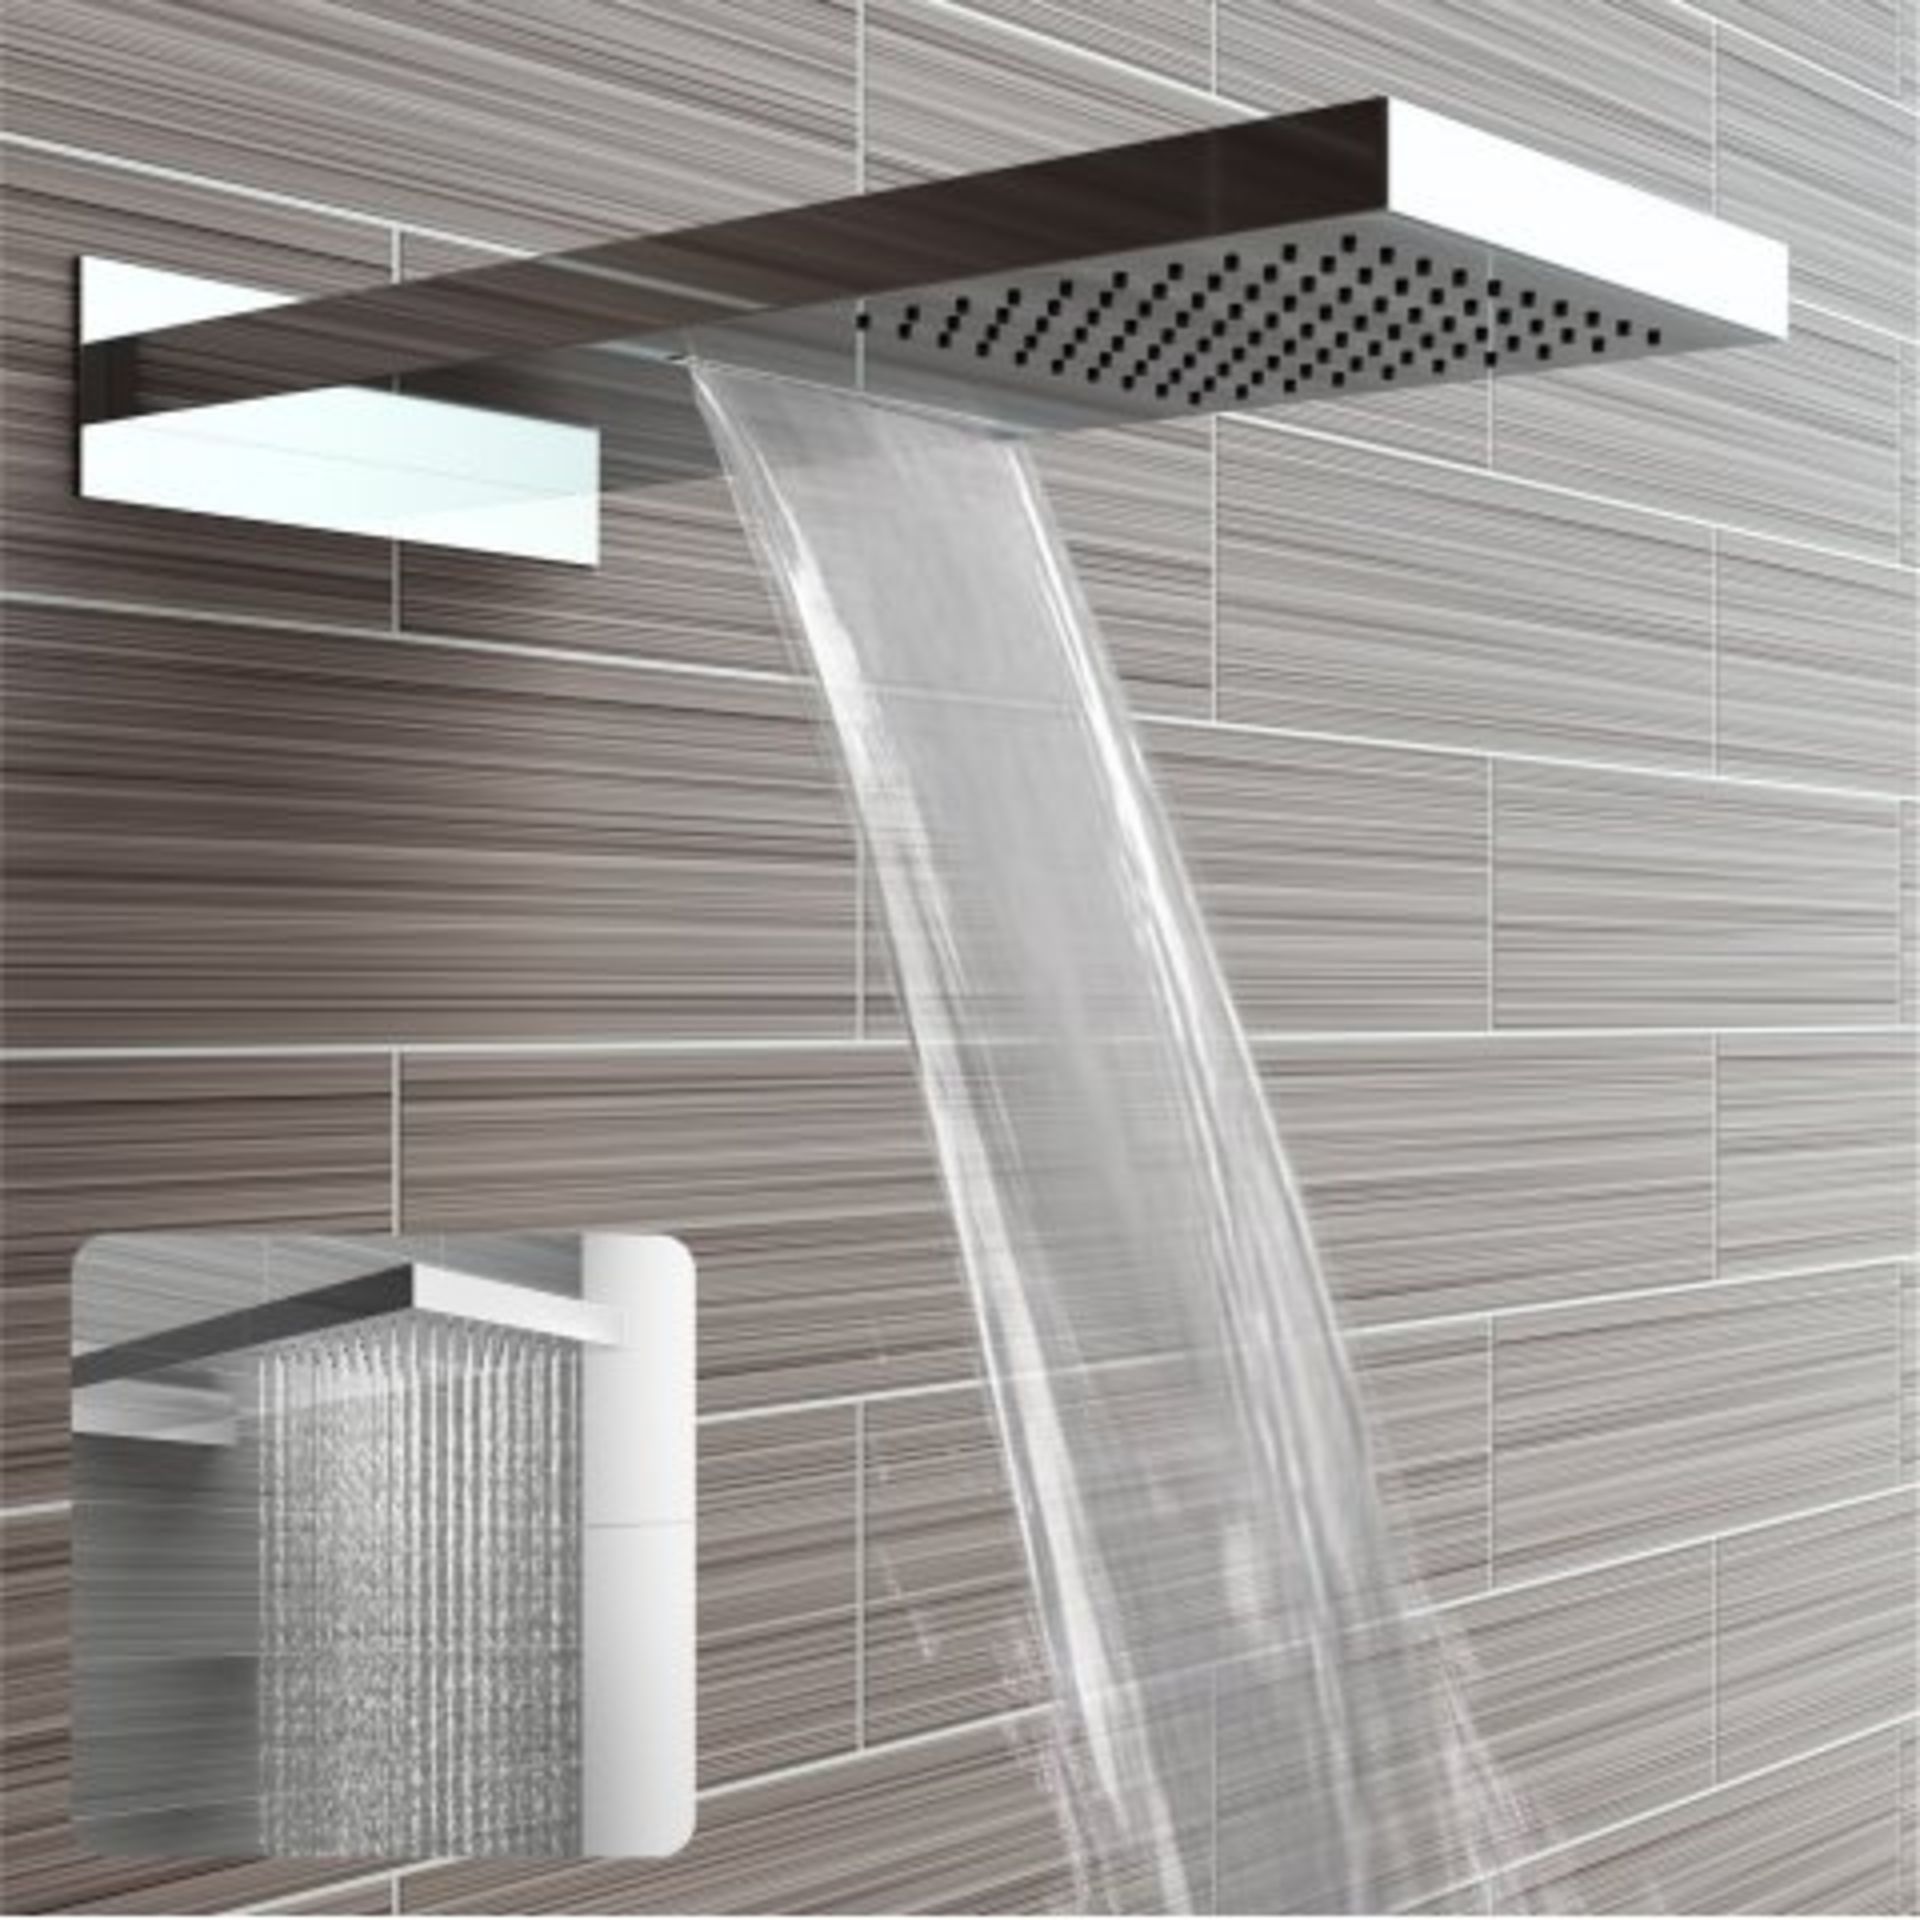 (N5) Stainless Steel 200x500mm Waterfall Shower Head. RRP £374.98. "What An Experience": Enjoy - Image 2 of 4